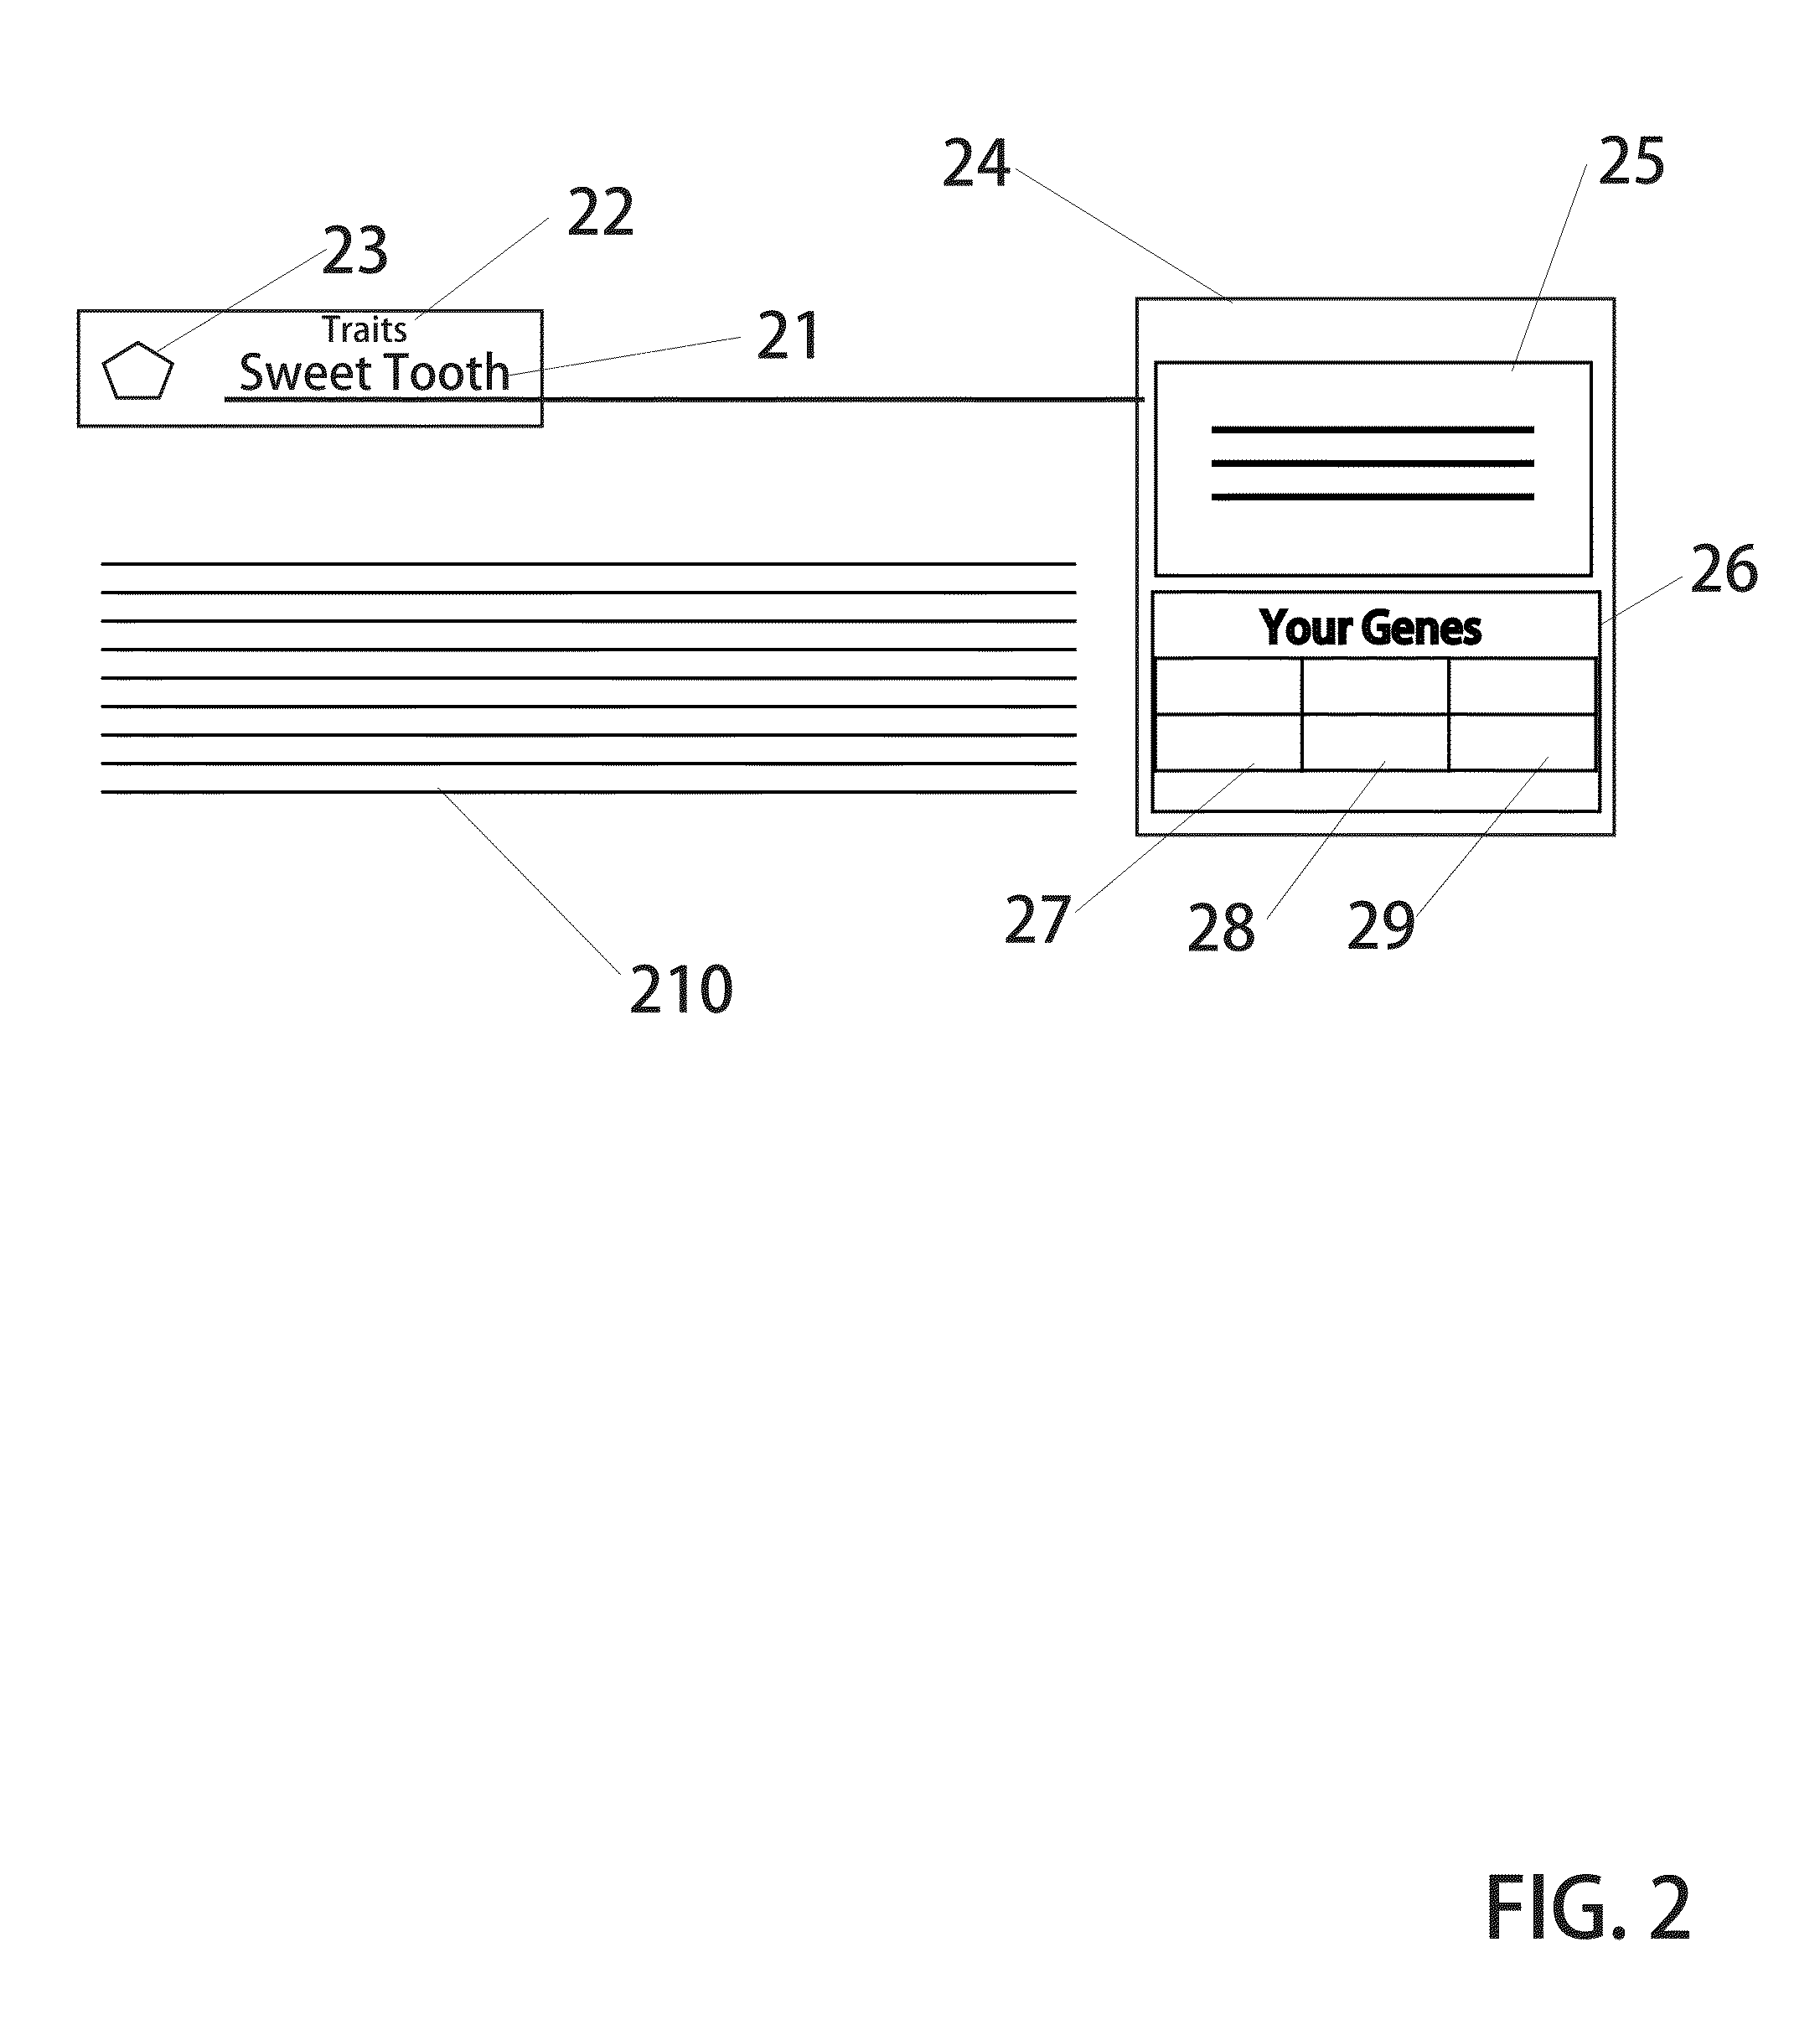 Genetic based health management apparatus and methods